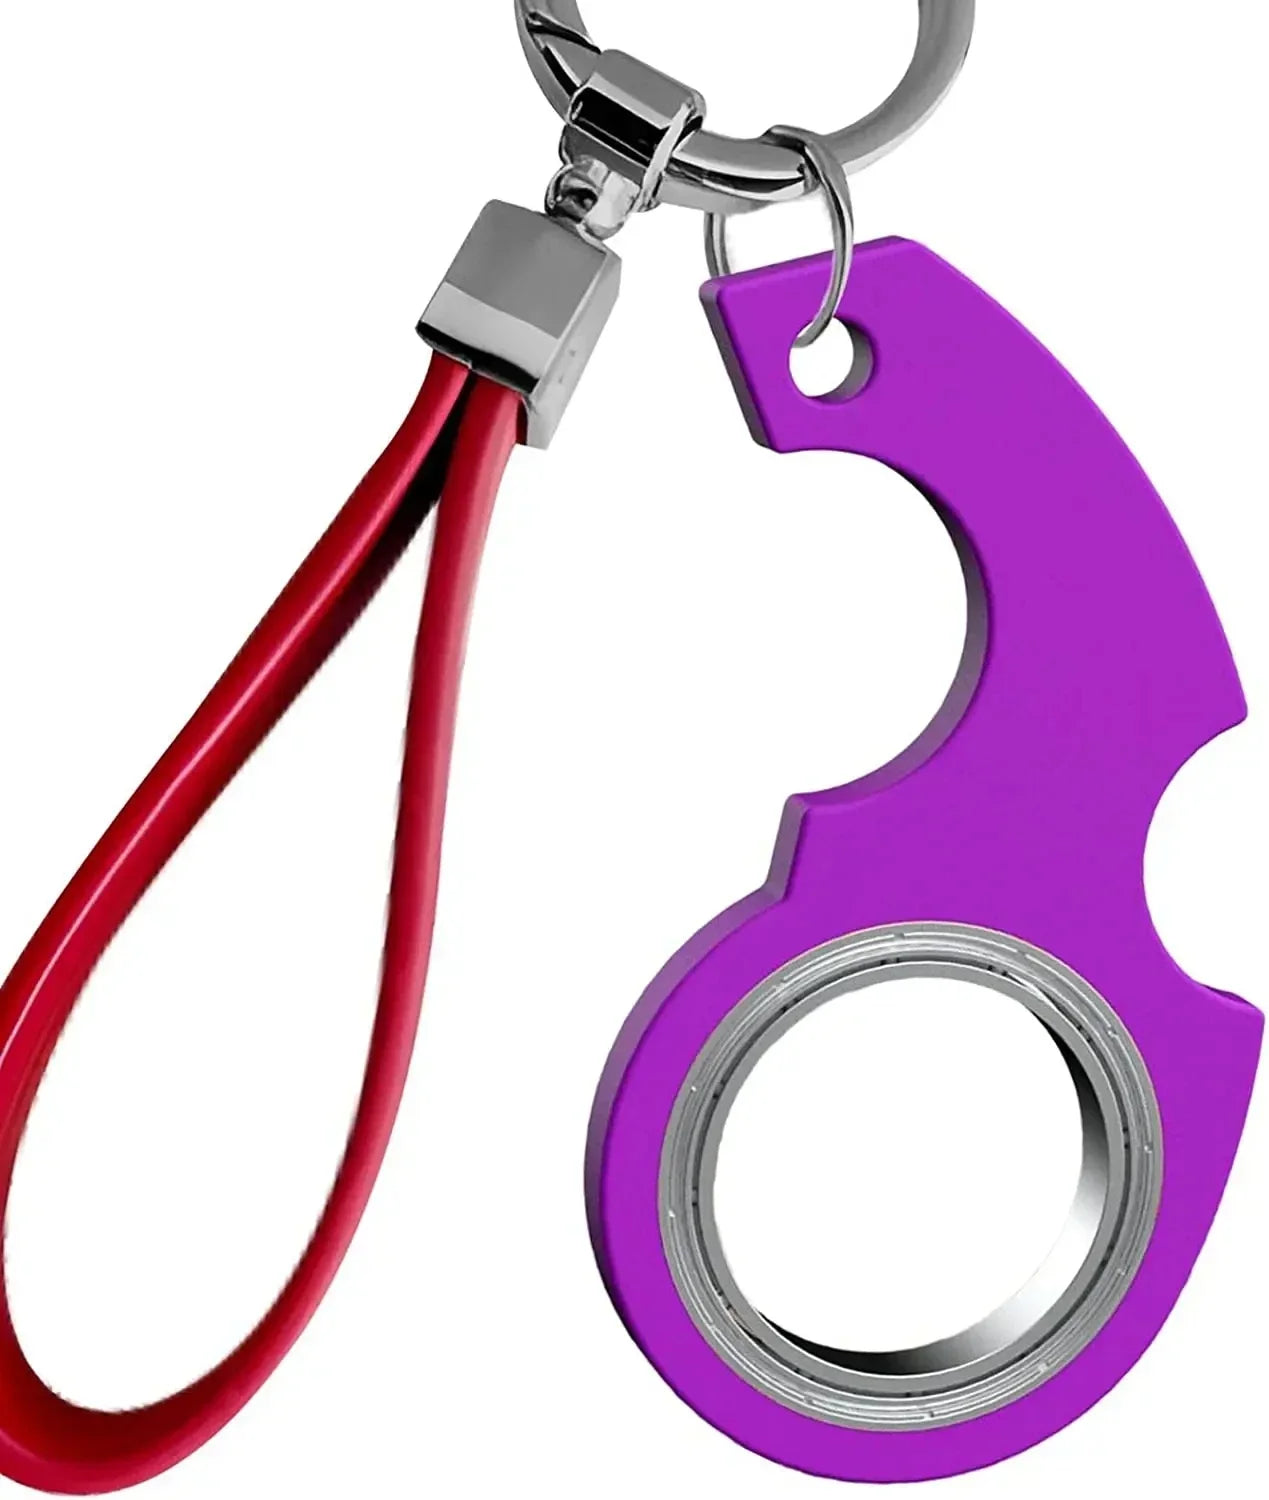 Ultimate Stress Relief: Fidget Spinner Keychain for Fun and Focus